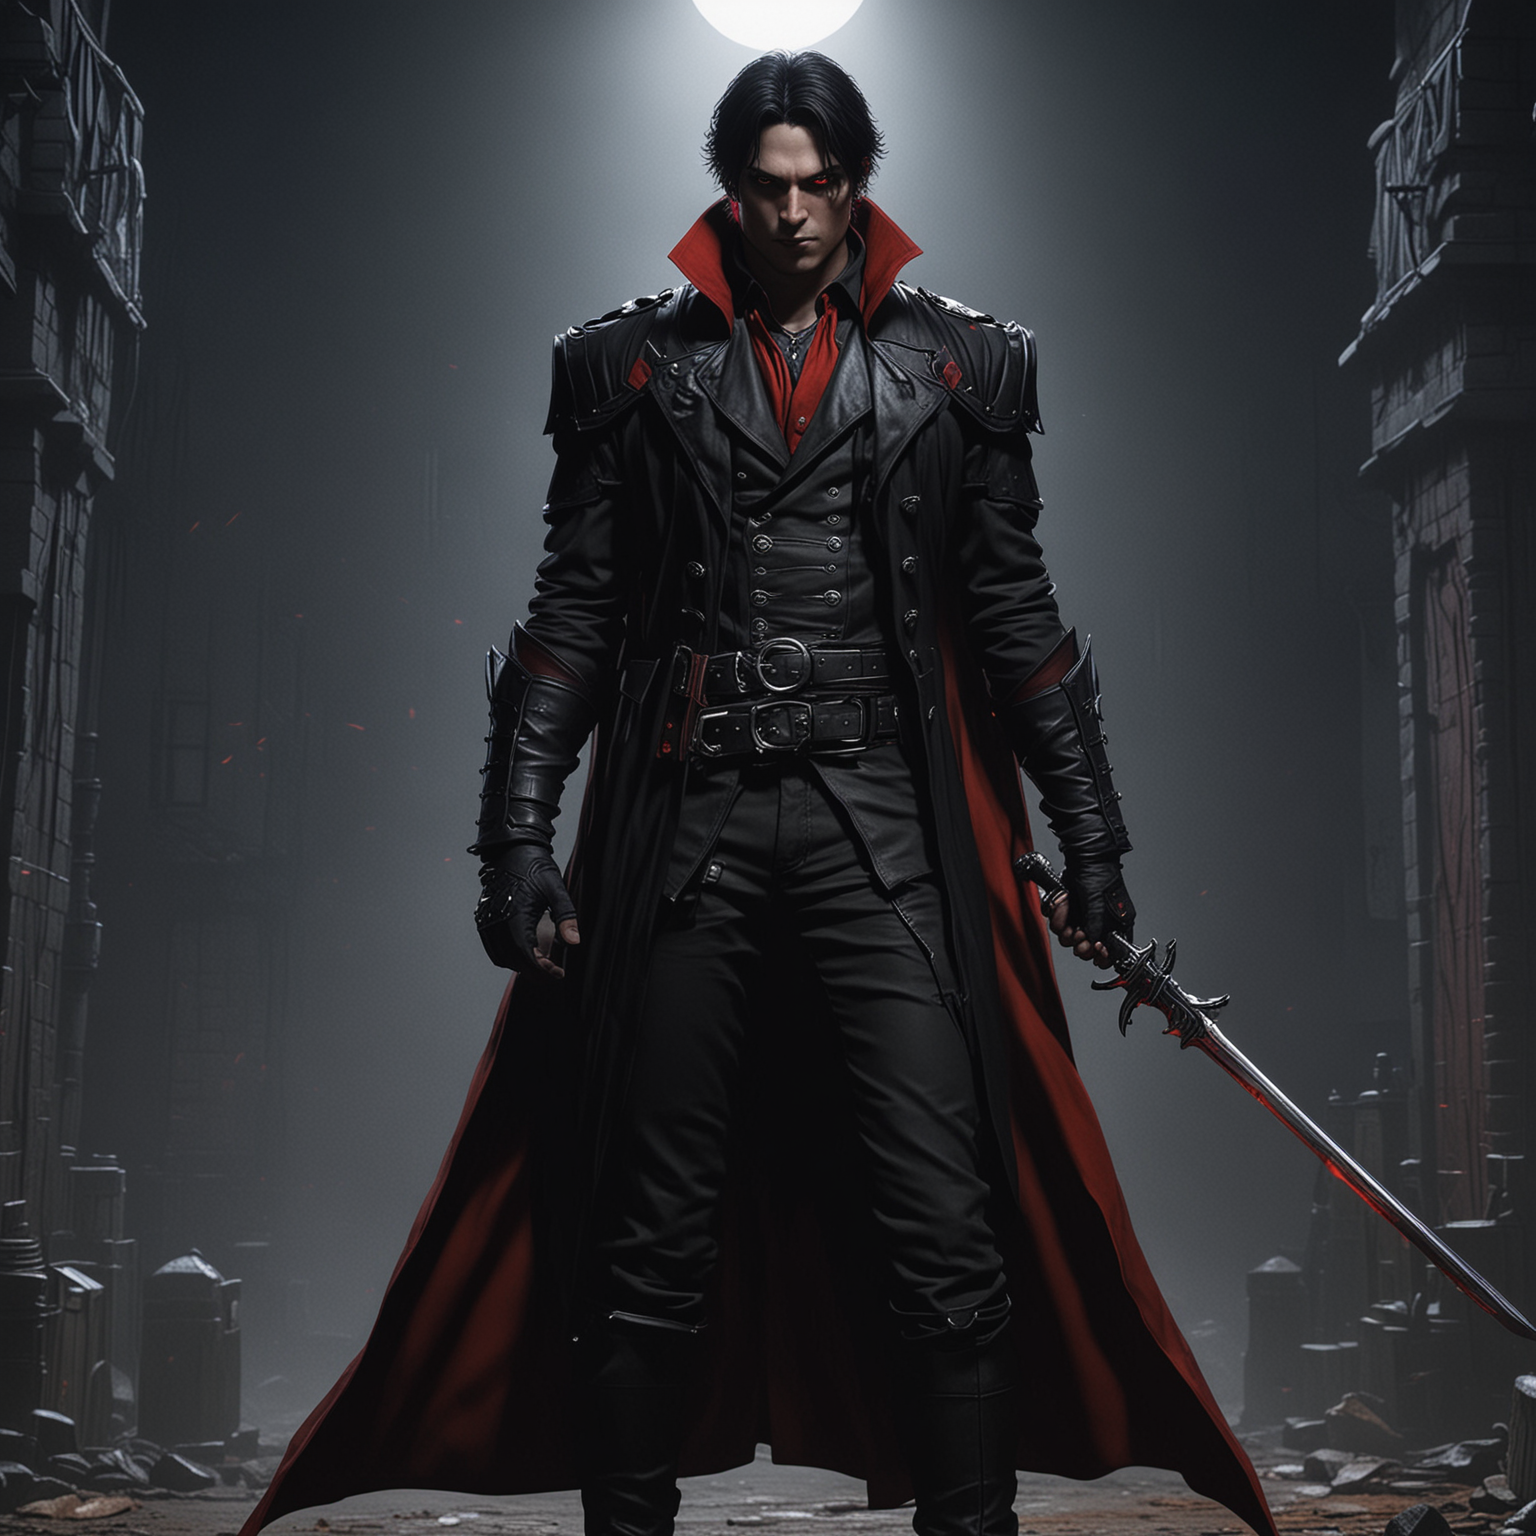 Cid Kagenou from anime The Eminence in Shadow as a vampire hunter in black with red hunter costume, shadows on background , hyper-realistic, photo-realistic